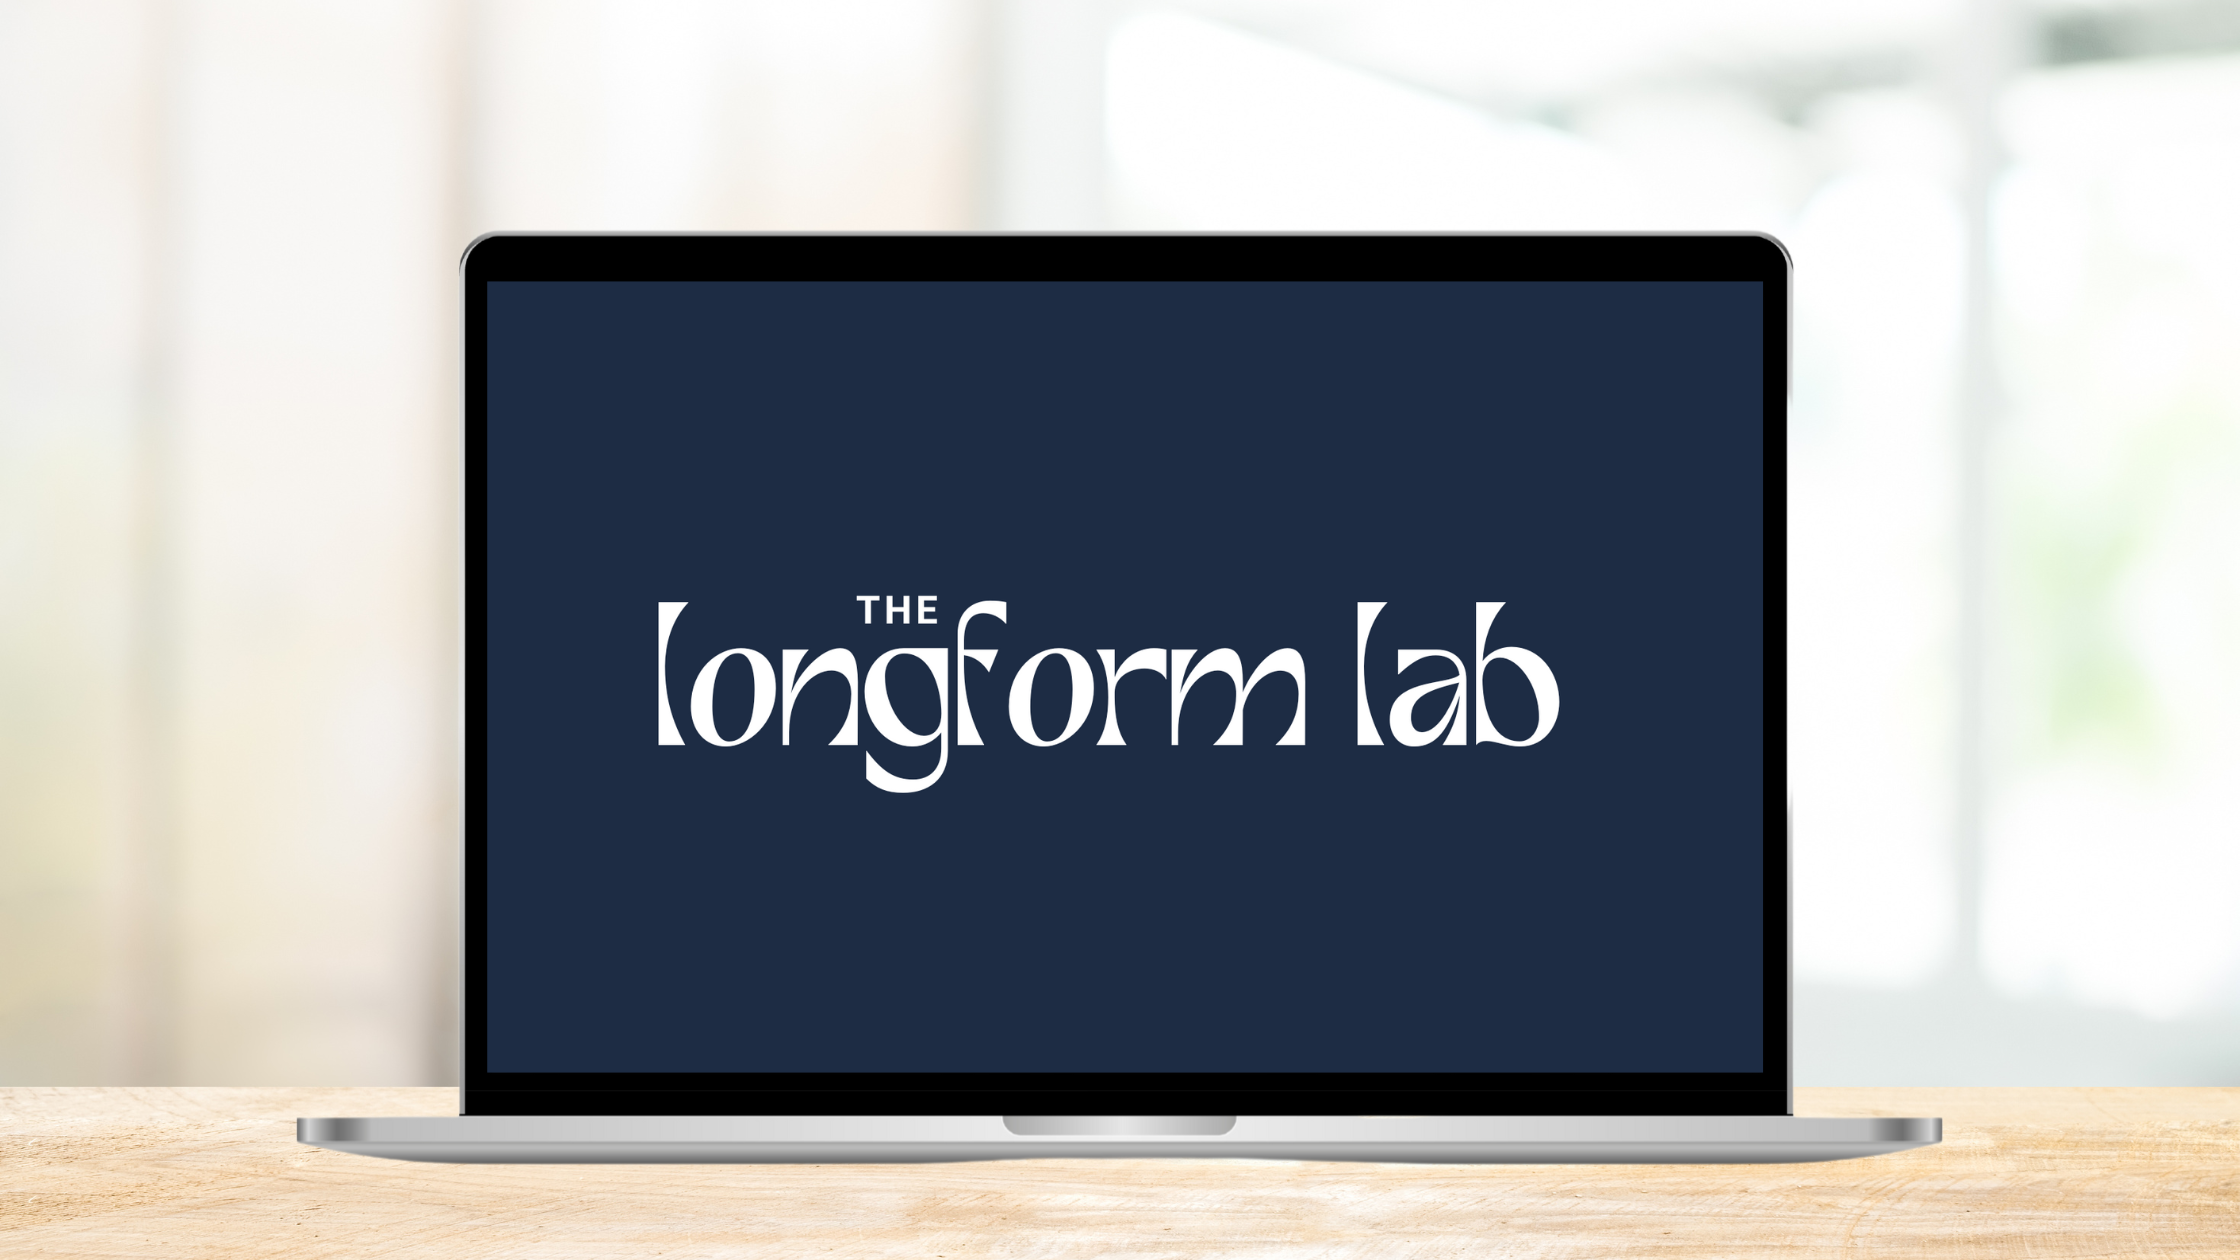 A laptop on a desk, displaying "the Longform Lab" in white text on a blue background.